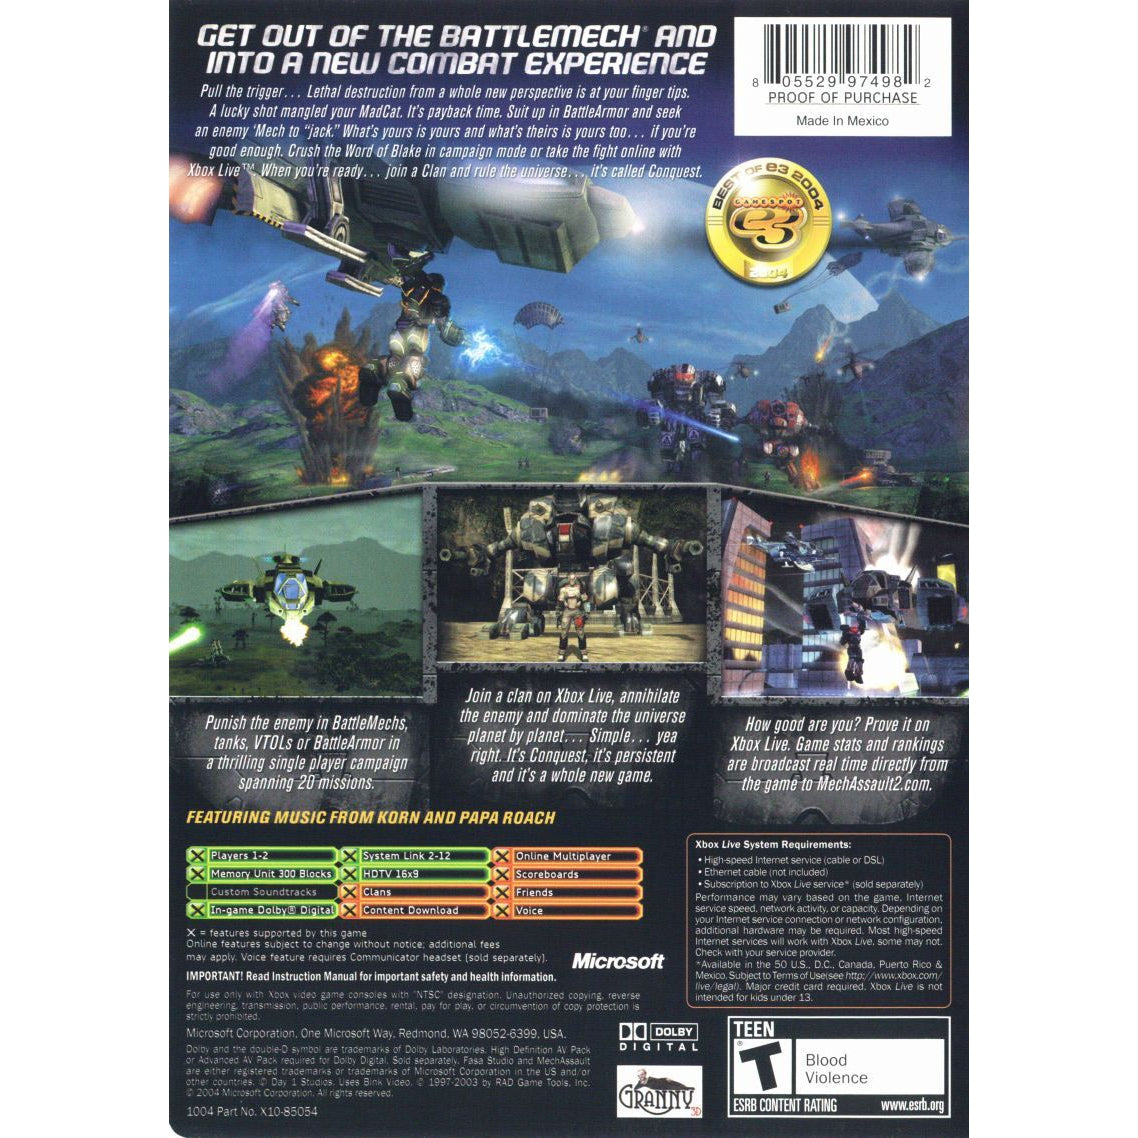 MechAssault 2: Lone Wolf - Microsoft Xbox Game Complete - YourGamingShop.com - Buy, Sell, Trade Video Games Online. 120 Day Warranty. Satisfaction Guaranteed.